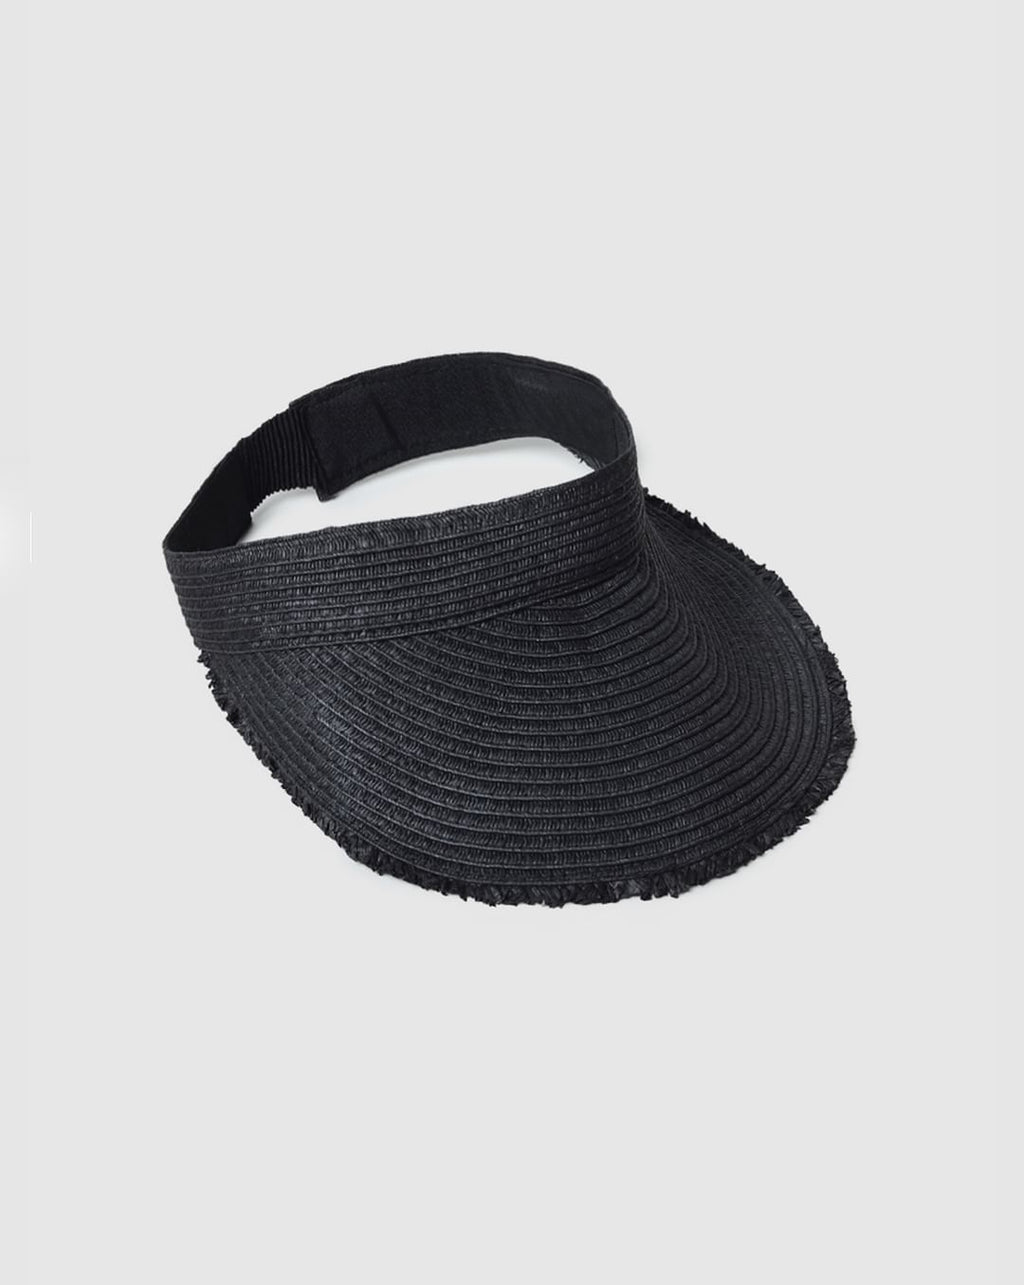 Buy Womens Sun Hat Online In India -  India